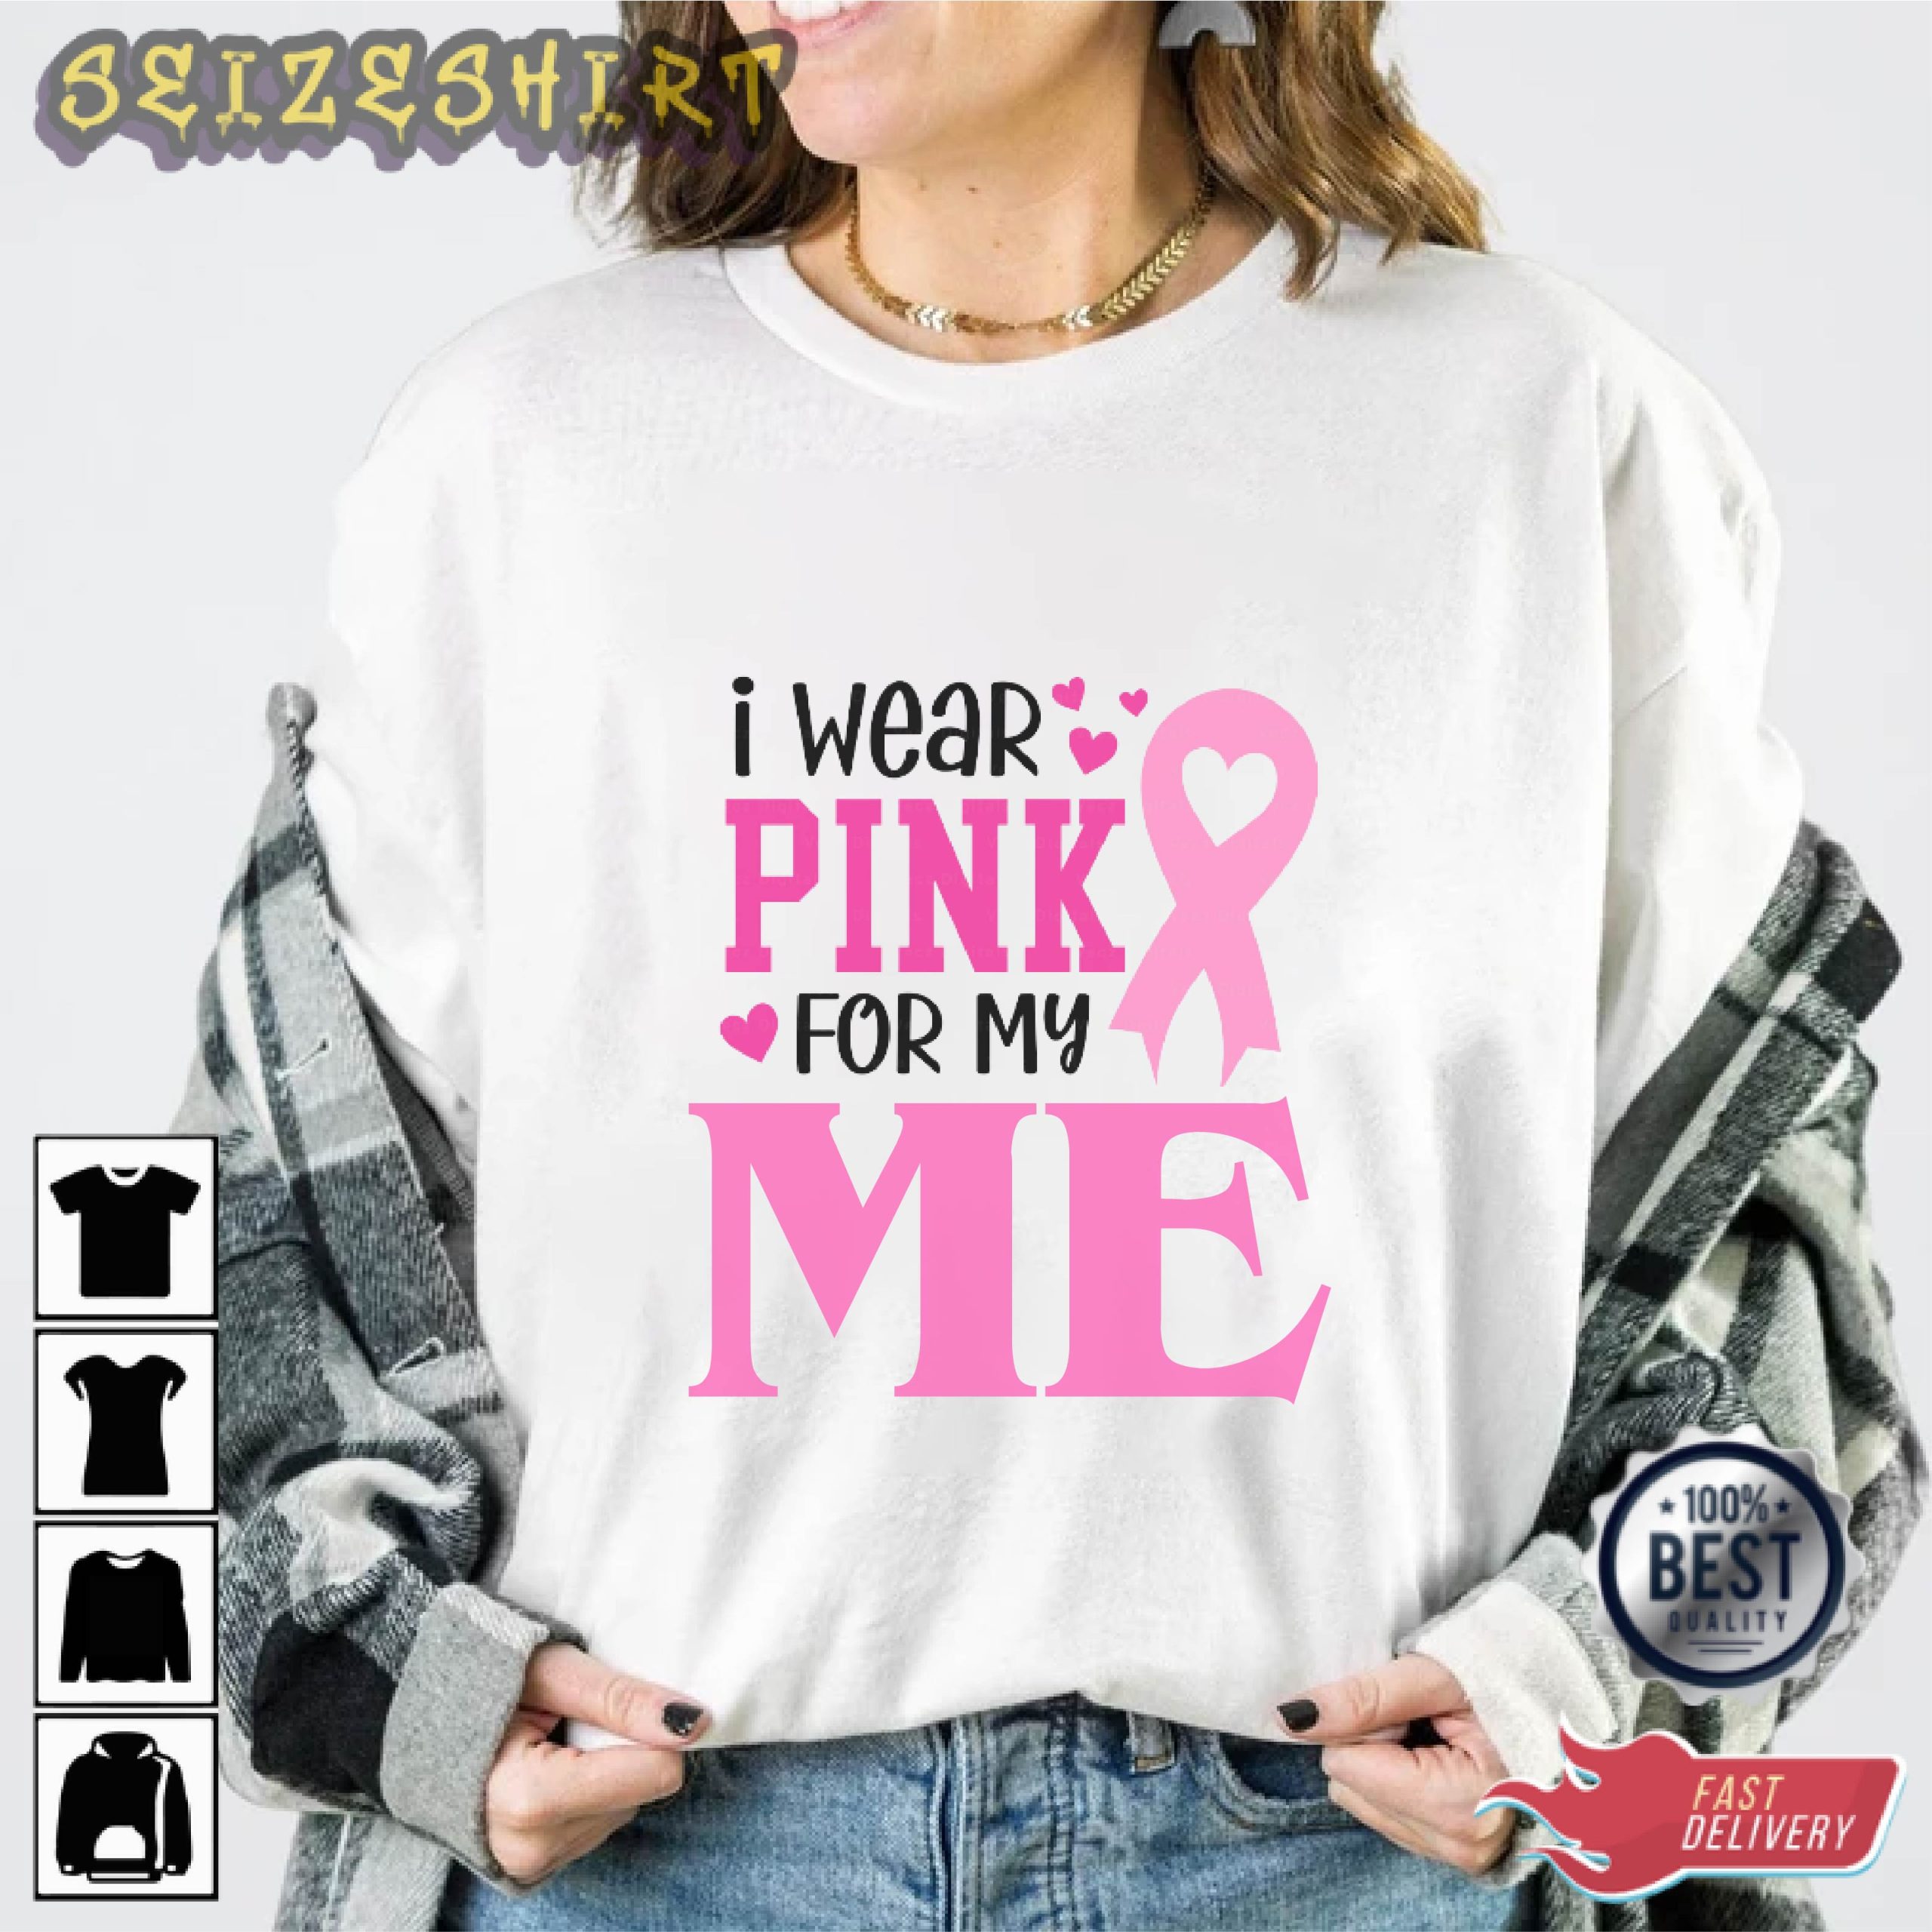 I Wear Pink For Me Essential Shirt